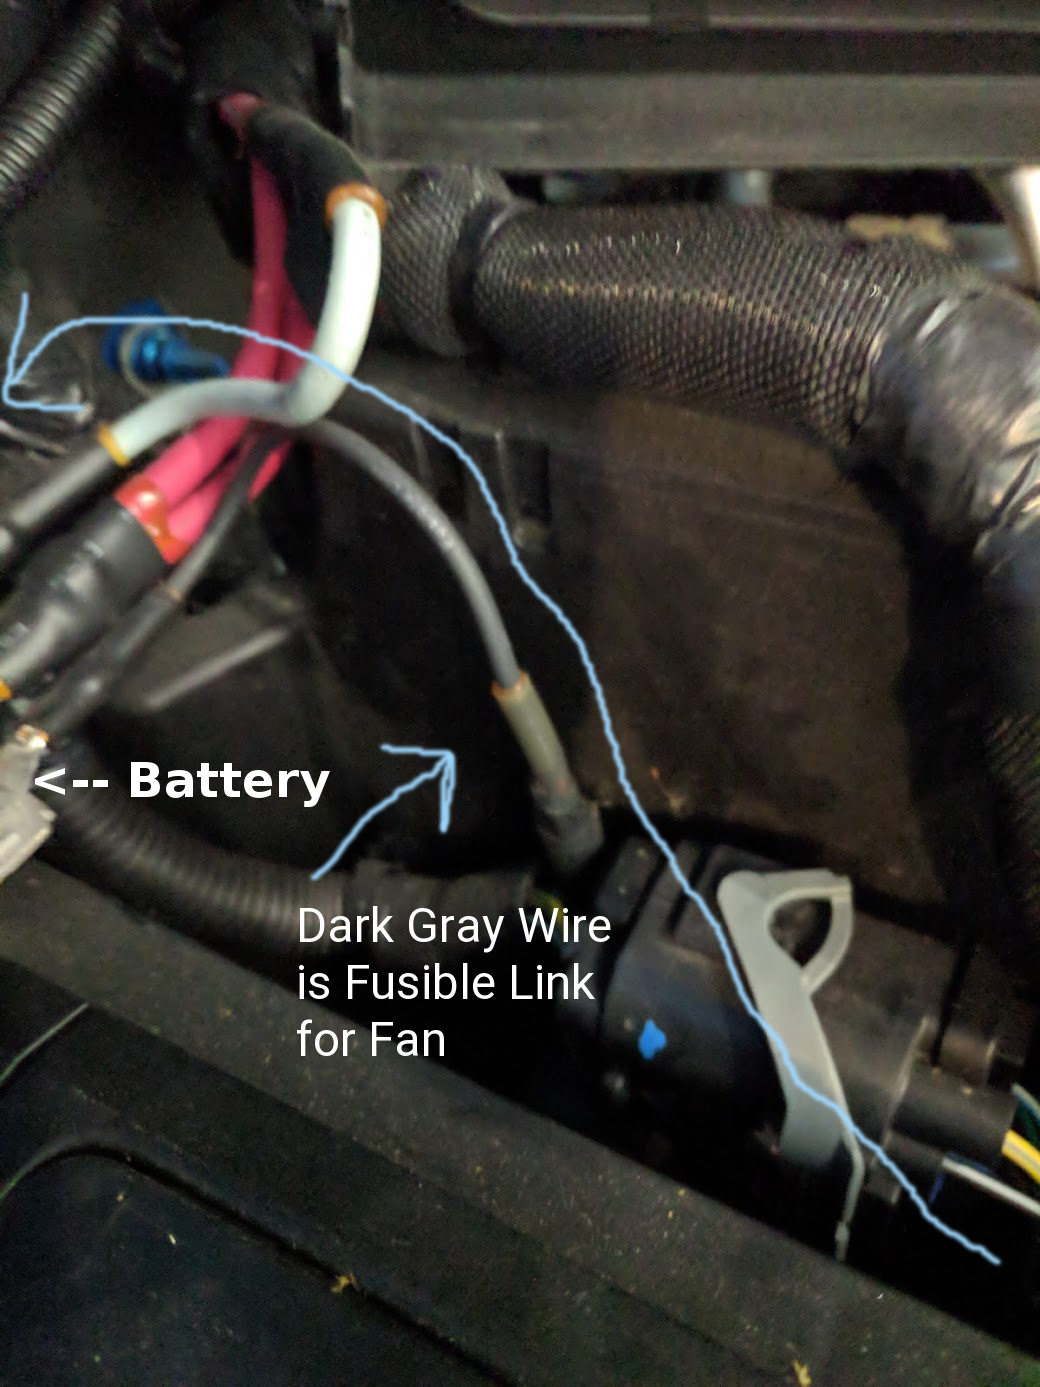 The Fusible Link Connecting to the Battery